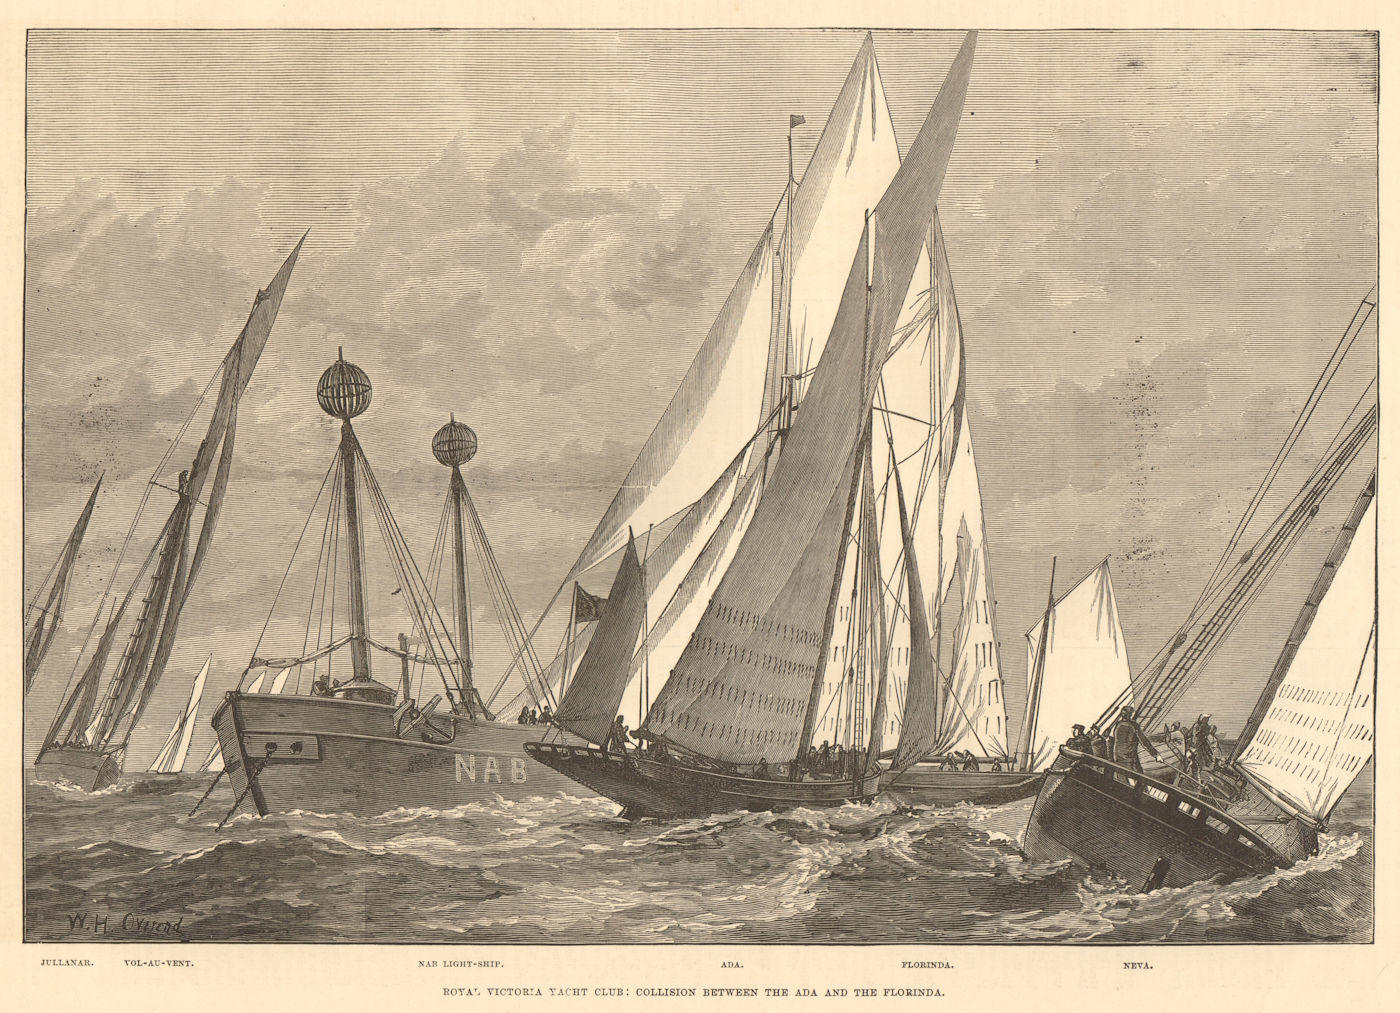 Associate Product Royal Victoria Yacht Club: The Ada & Florinda colliding. Isle of Wight 1877